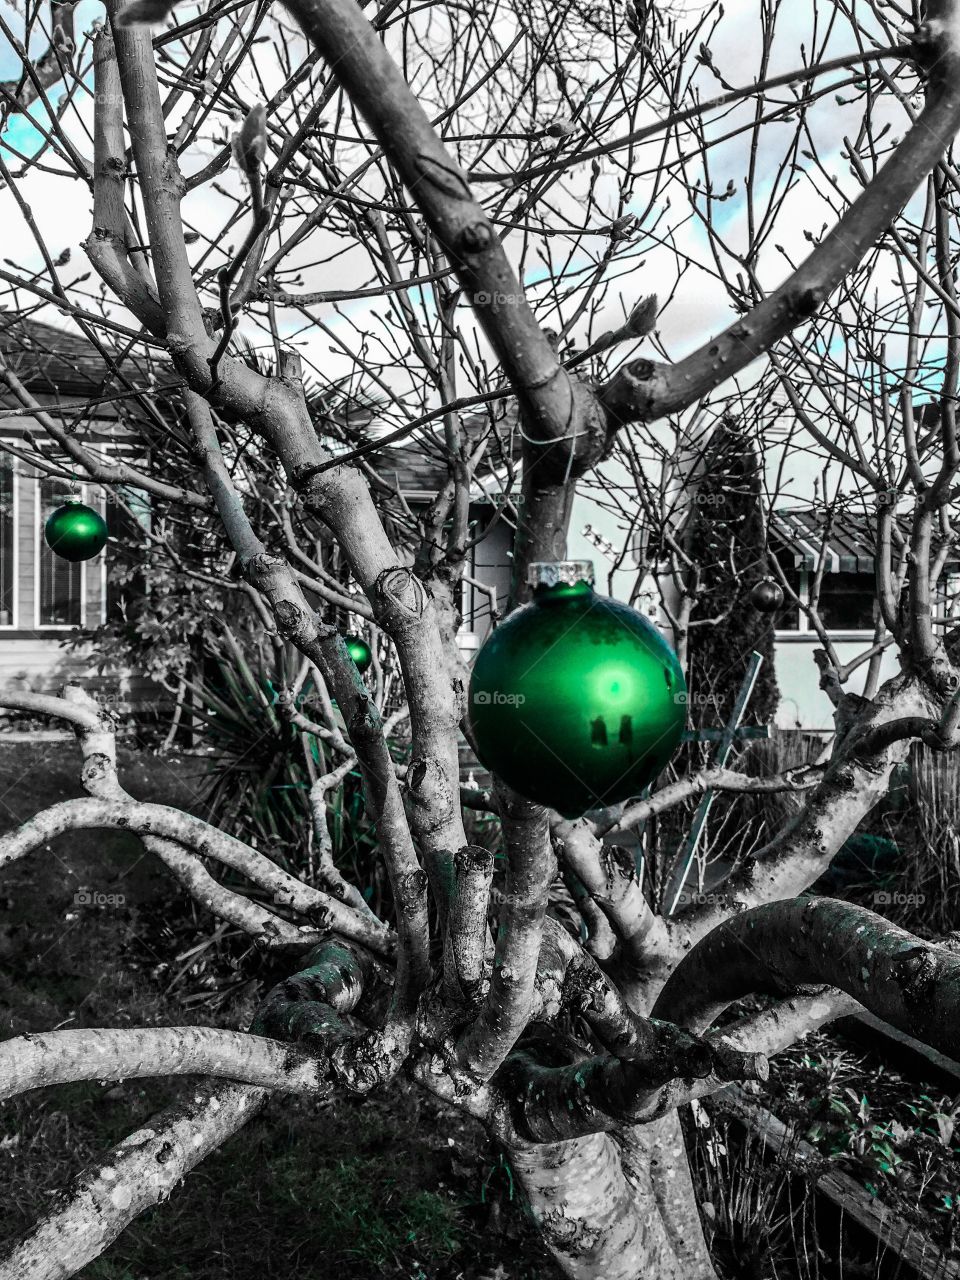 Christmas bauble in black and white with green accent